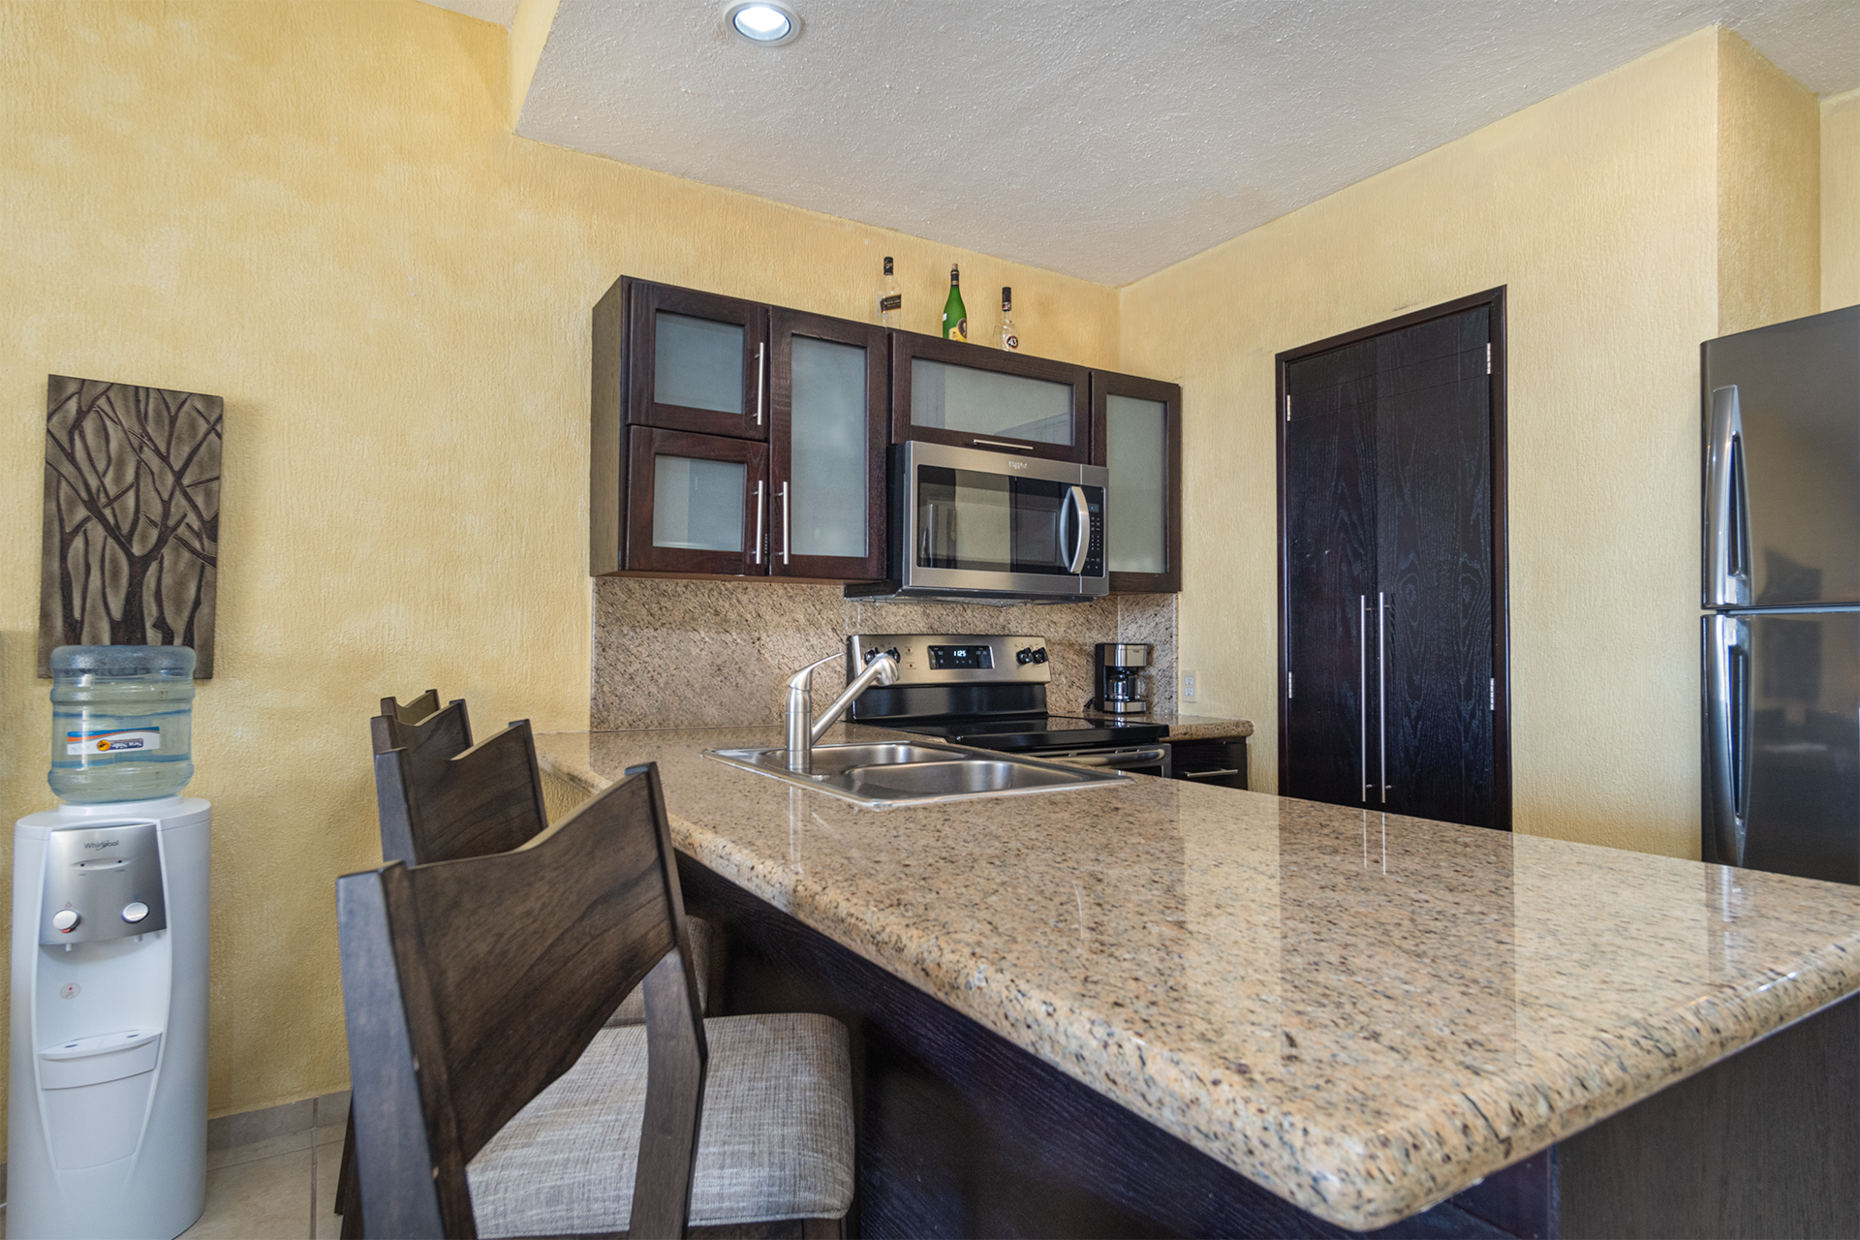 A counter top and bar stool seats define the kitchen.